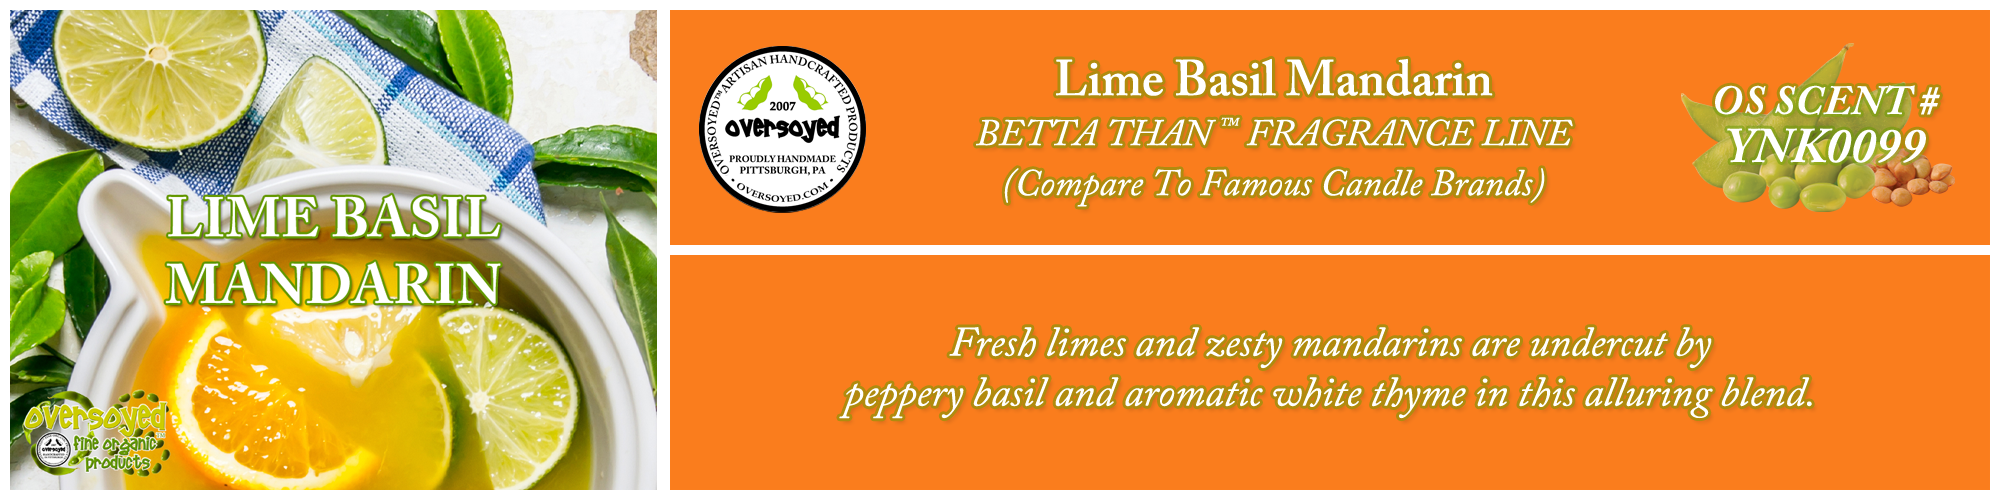 Lime Basil Mandarin Handcrafted Products Collection